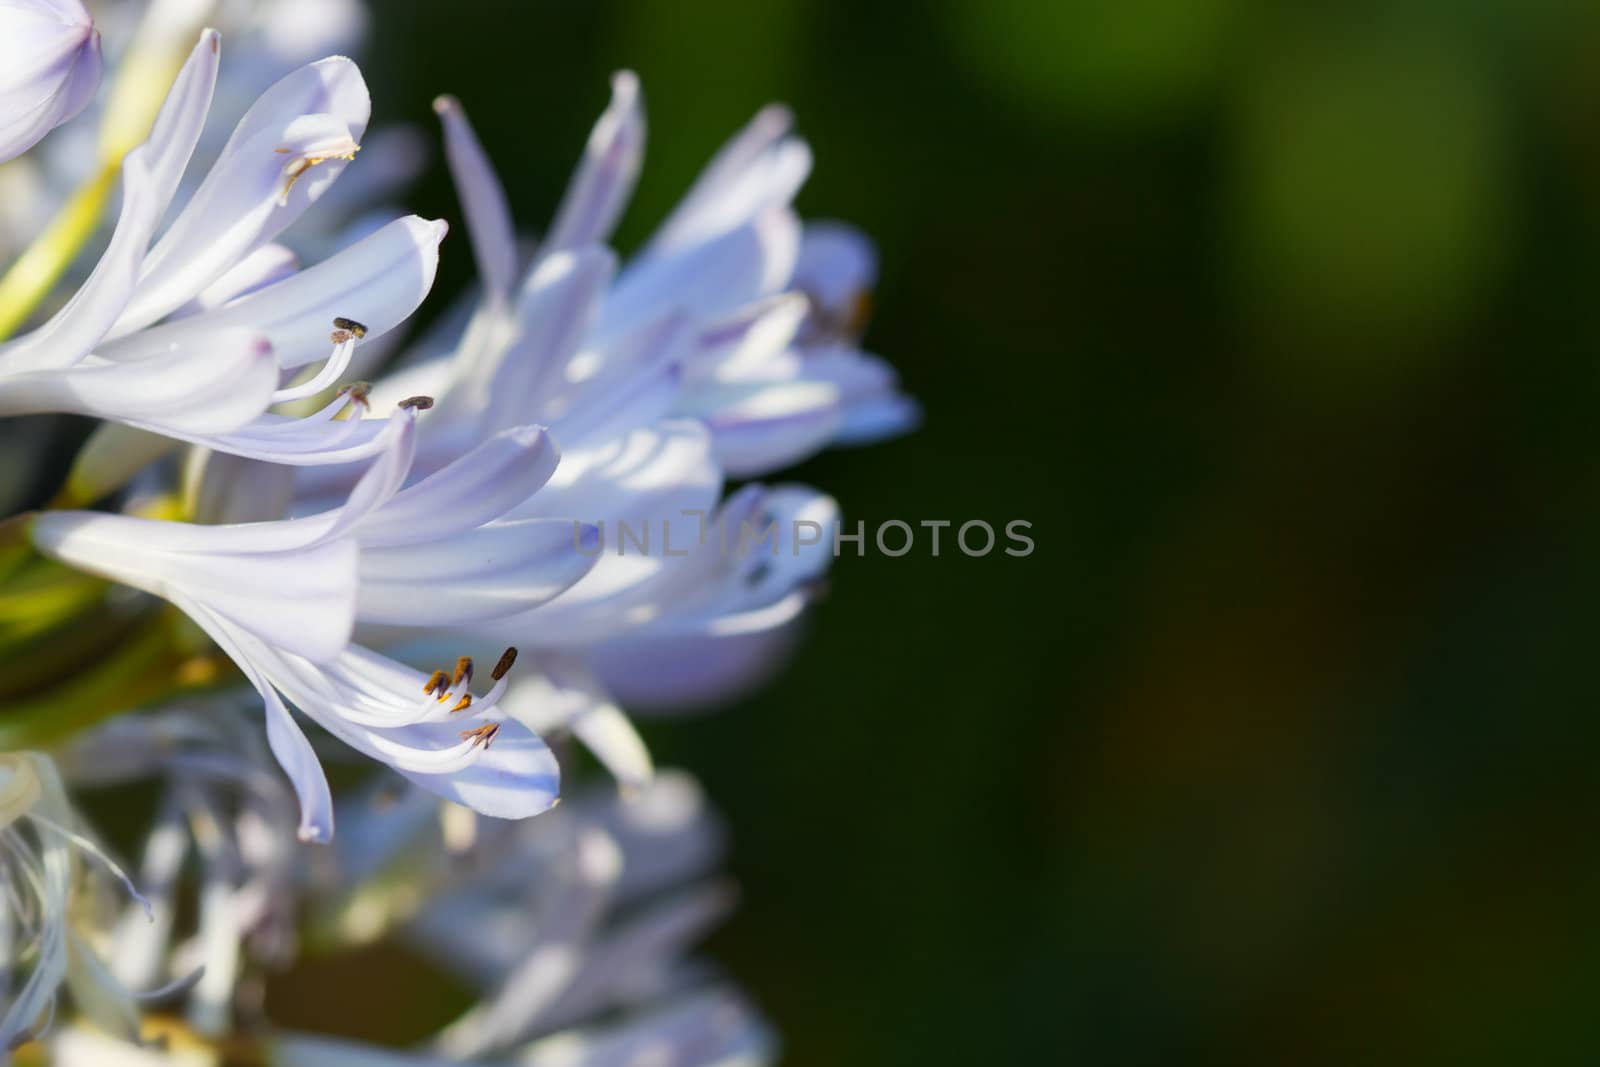 Narrow depth of field Macro of violet and white lilies with dark background